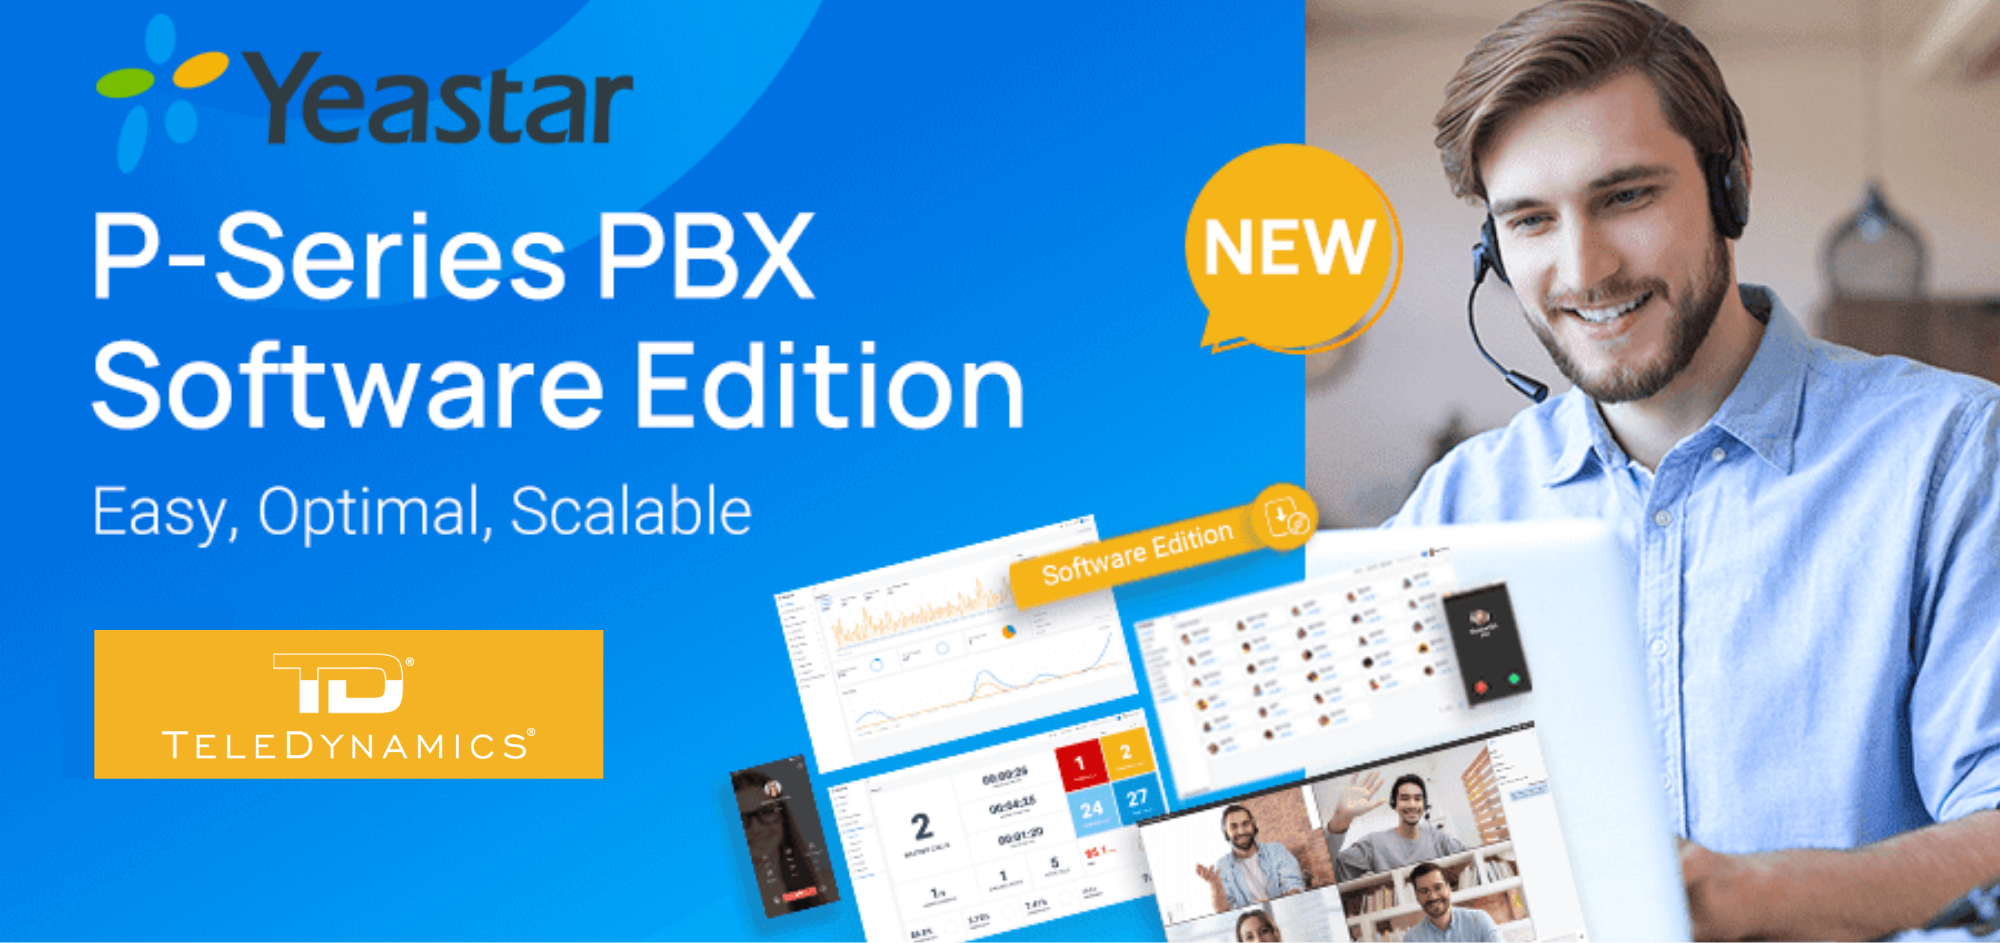 Yeastar P-Series PBX Software Edition distributed by TeleDynamics